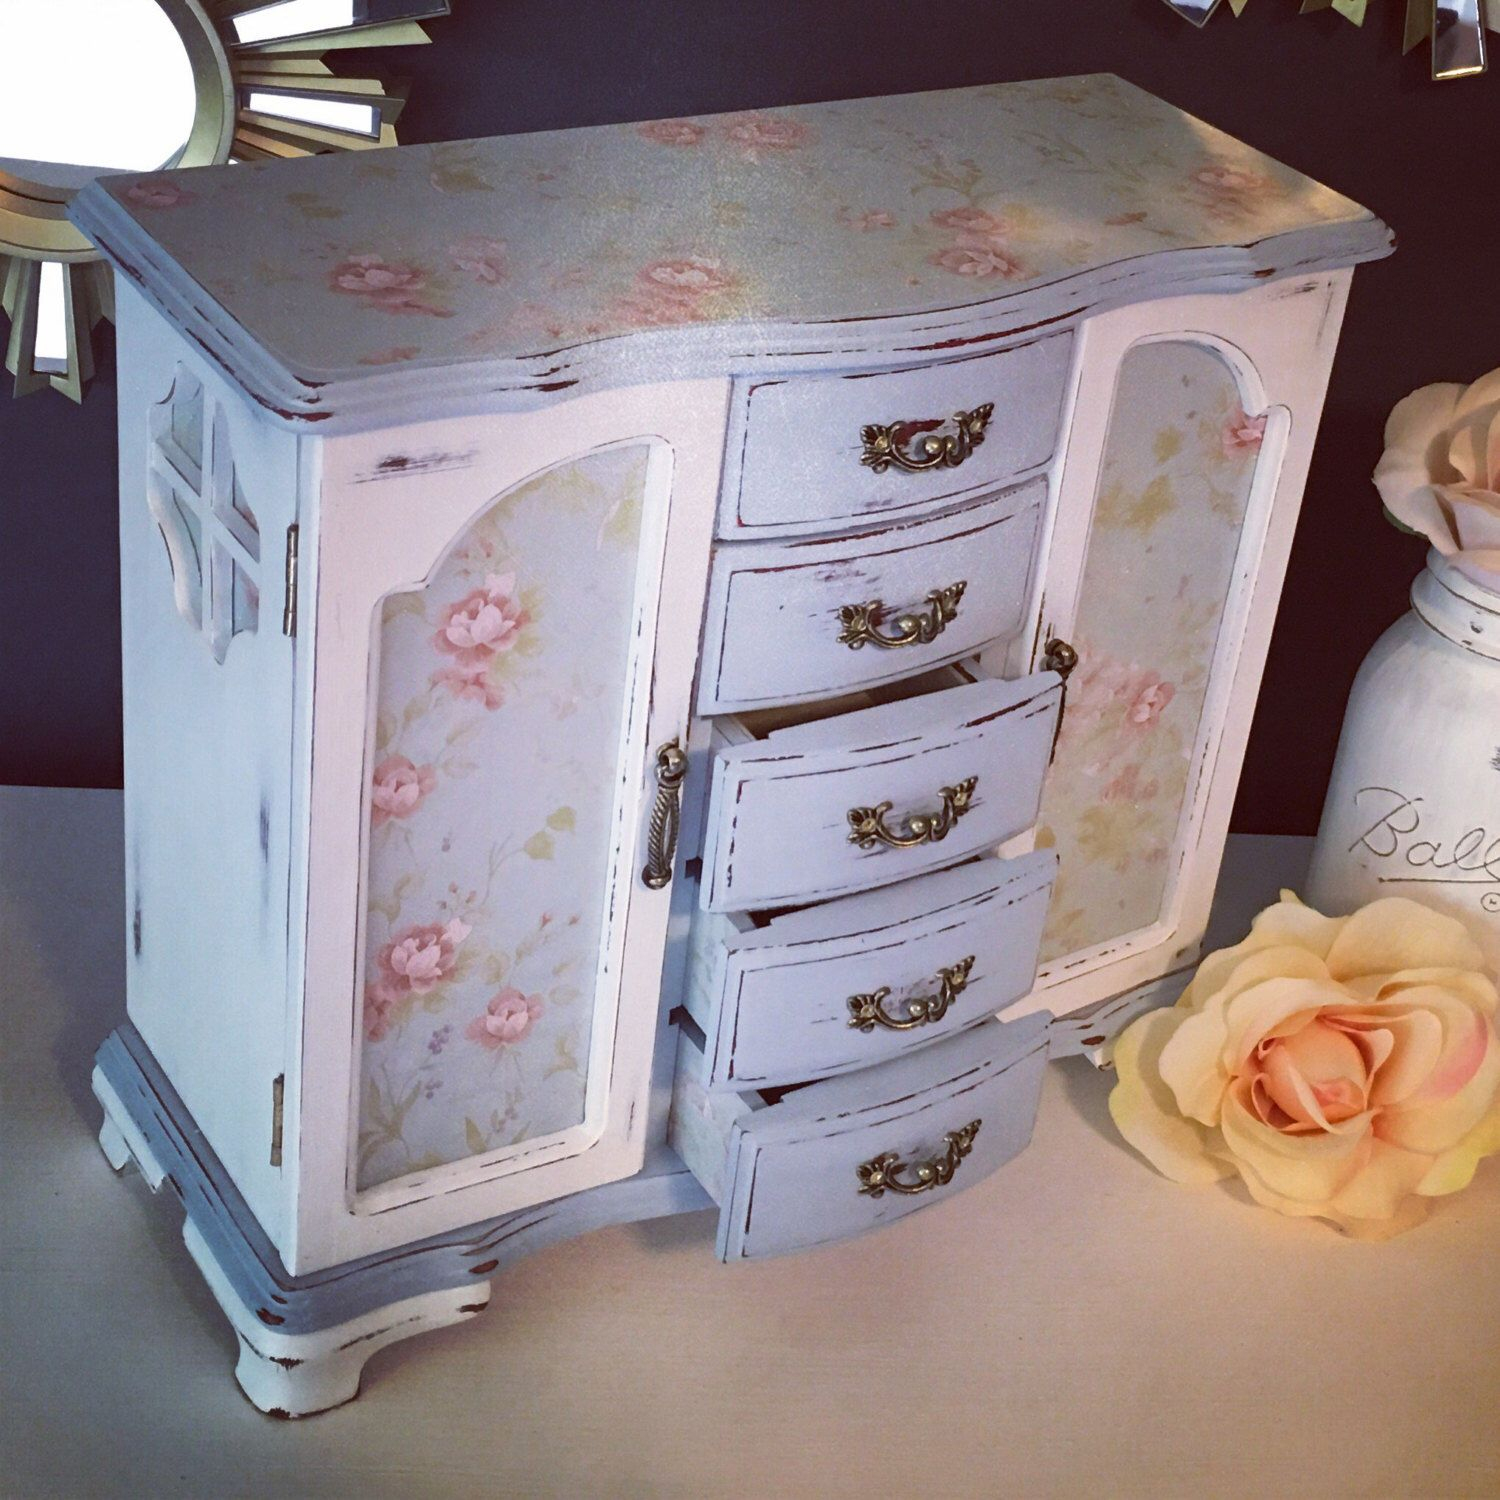 Large Blue And White Shabby Chic Wooden Jewelry Box tout Jewellery Box Shabby Chic